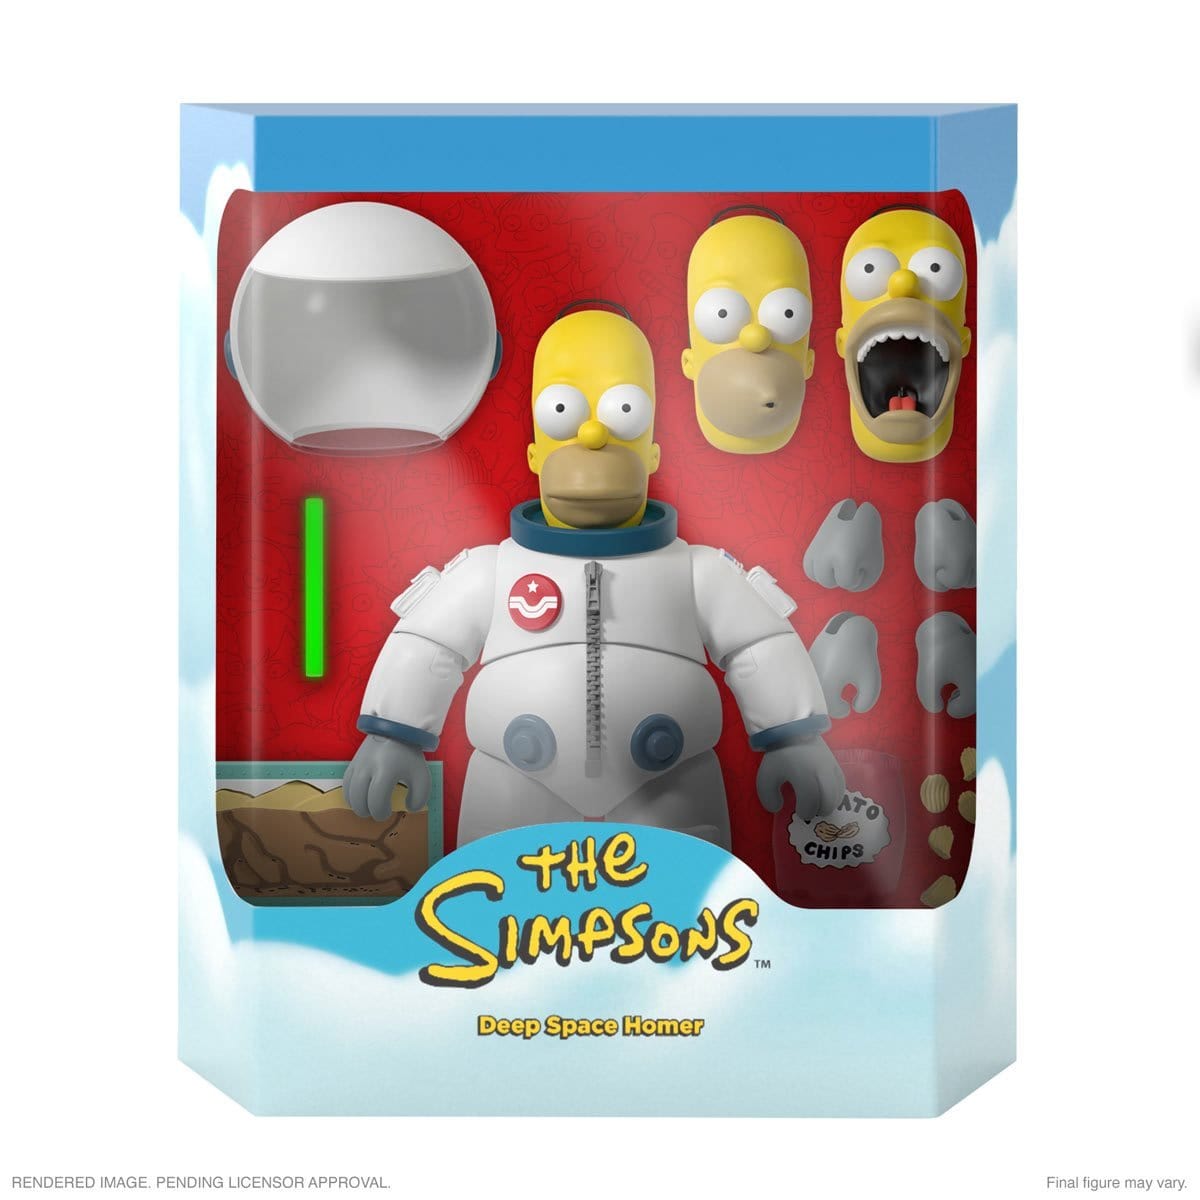 The Simpsons Deep Space Homer Super7 Ultimates 7-Inch Action Figure Pop-O-Loco